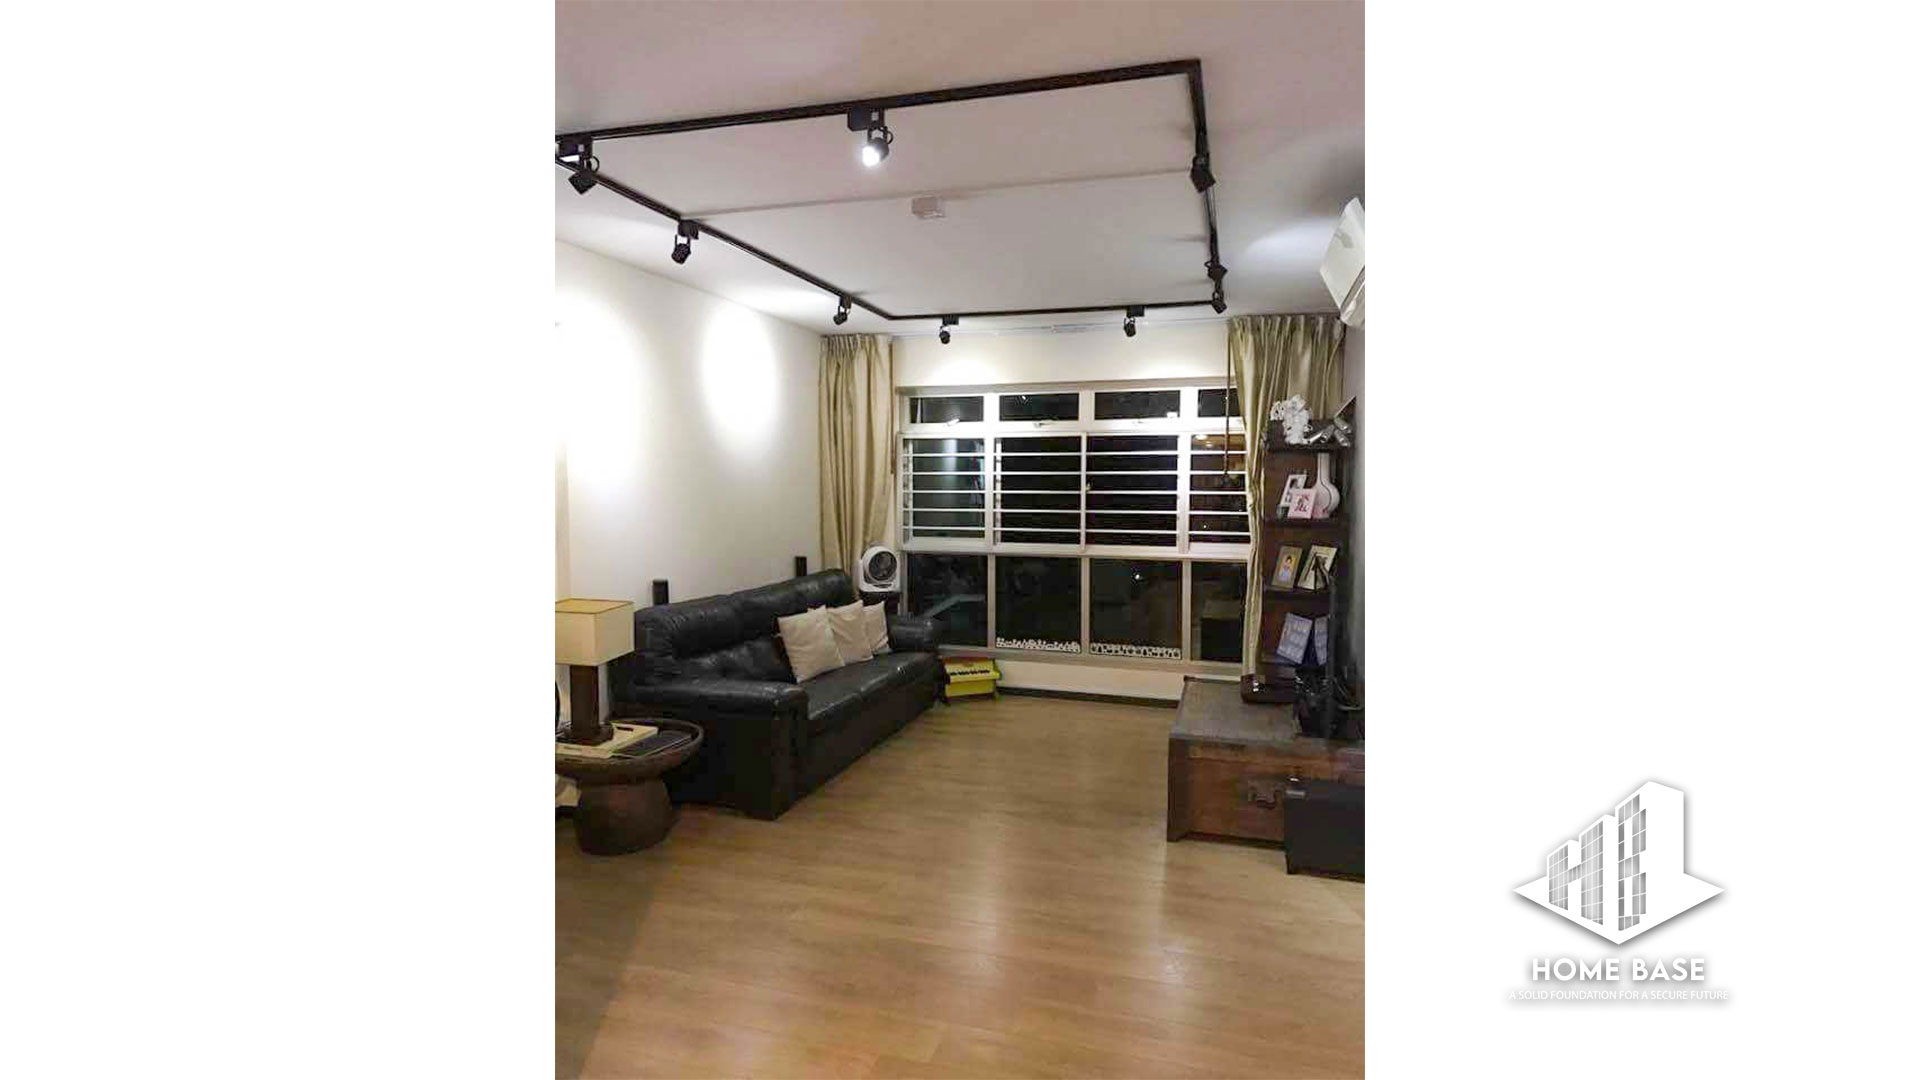 Living Room of 614A Punggol Drive Img 1